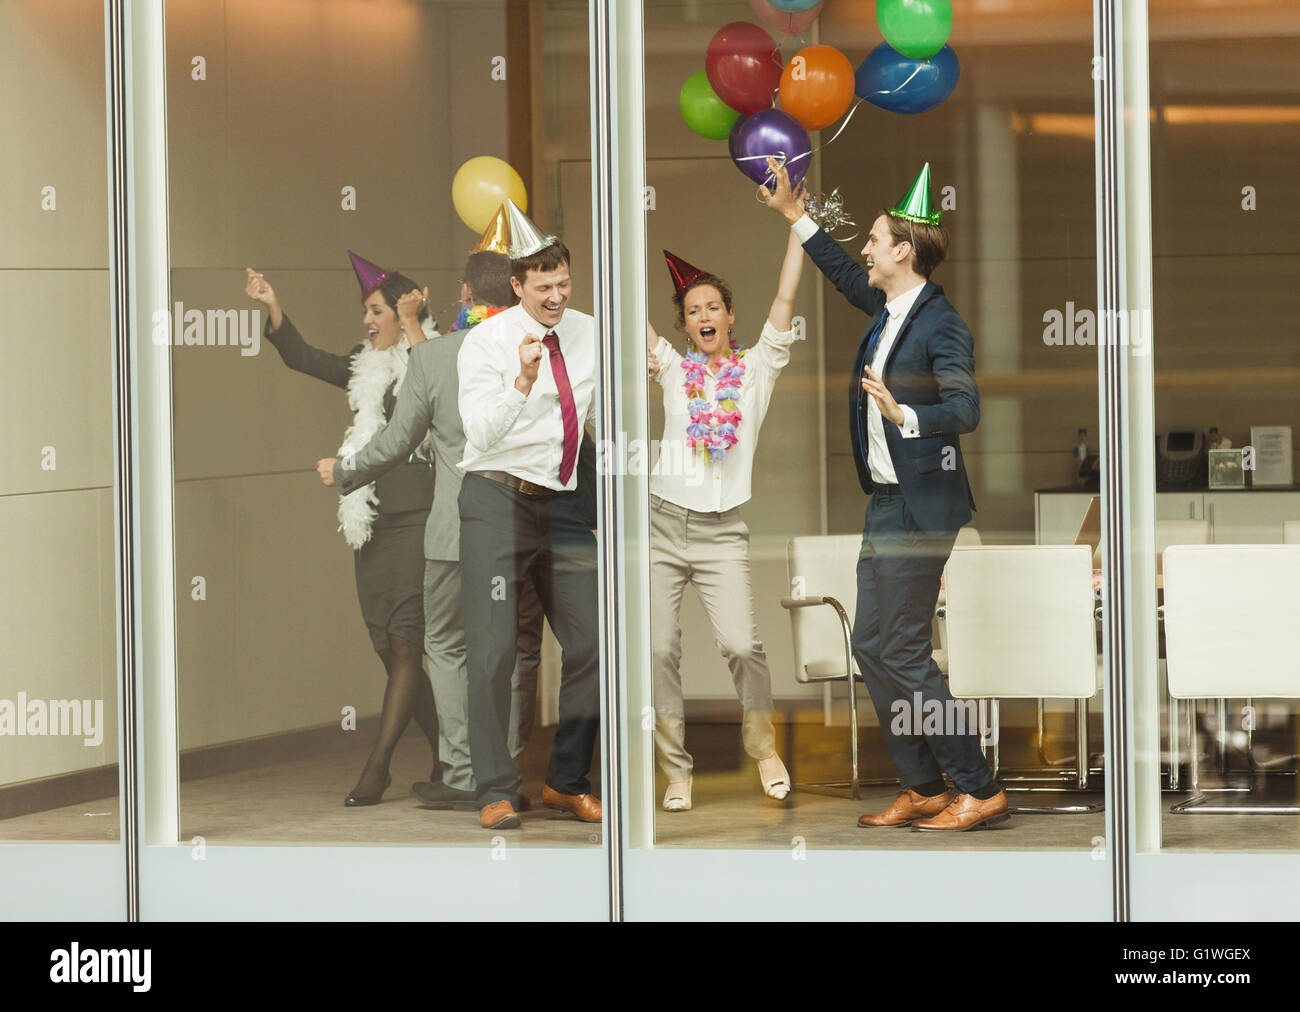 Business people wearing party hats and dancing with balloons at conference room window Stock Photo